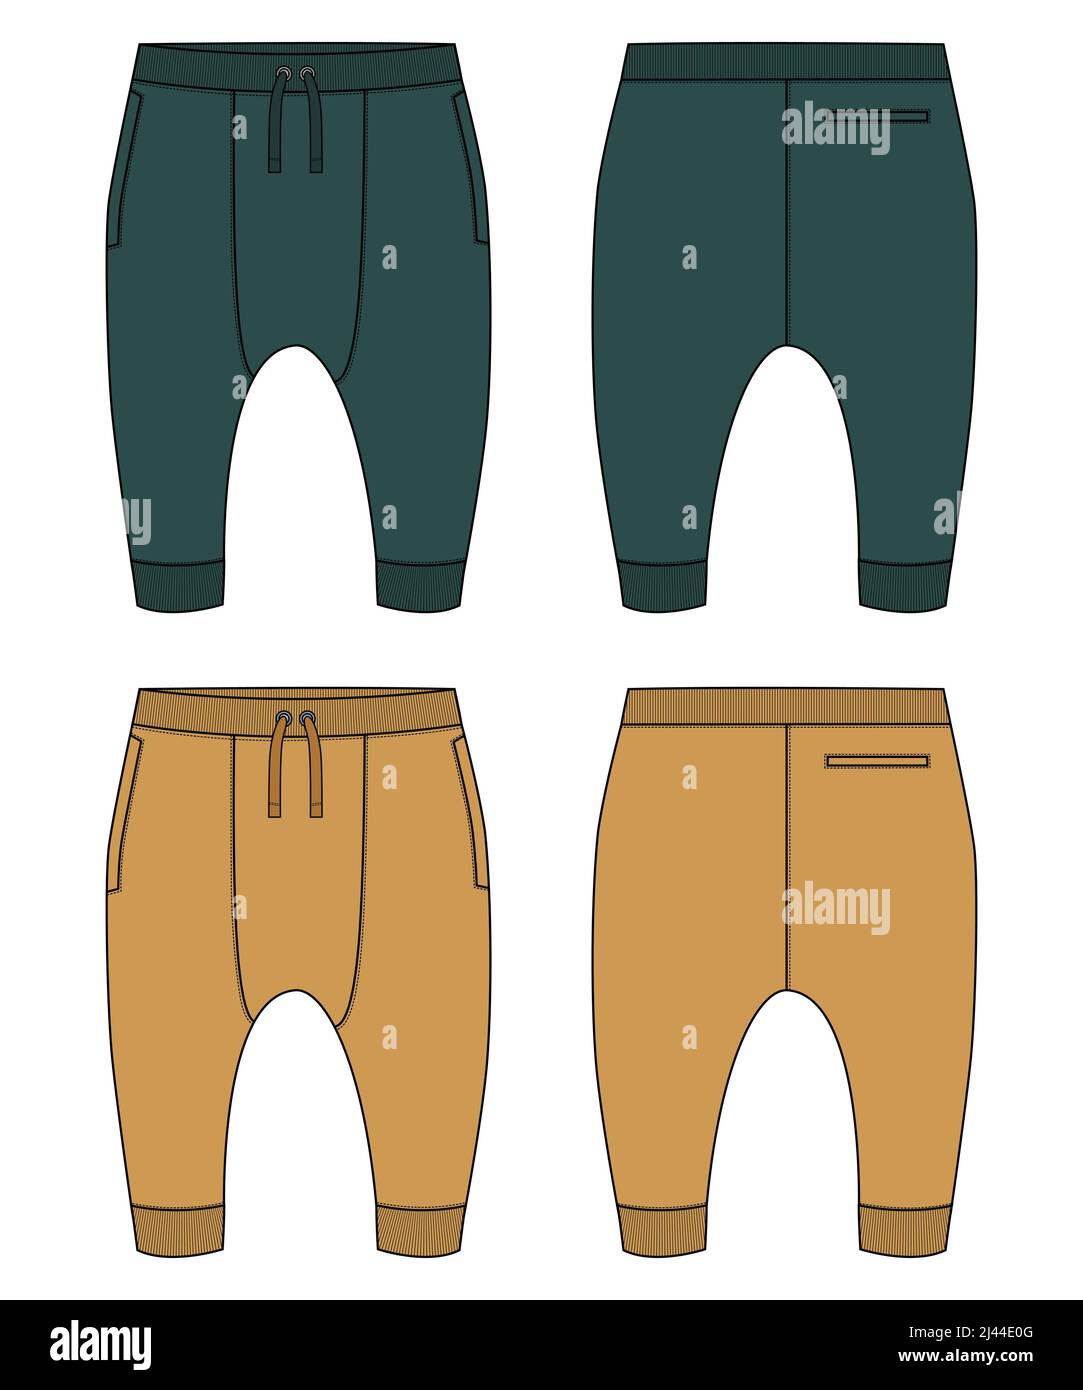 Sweatpants Fashion flat sketch vector illustration template For Kids. Apparel Clothing Design Green, Yellow color Mock up Cad. Stock Vector